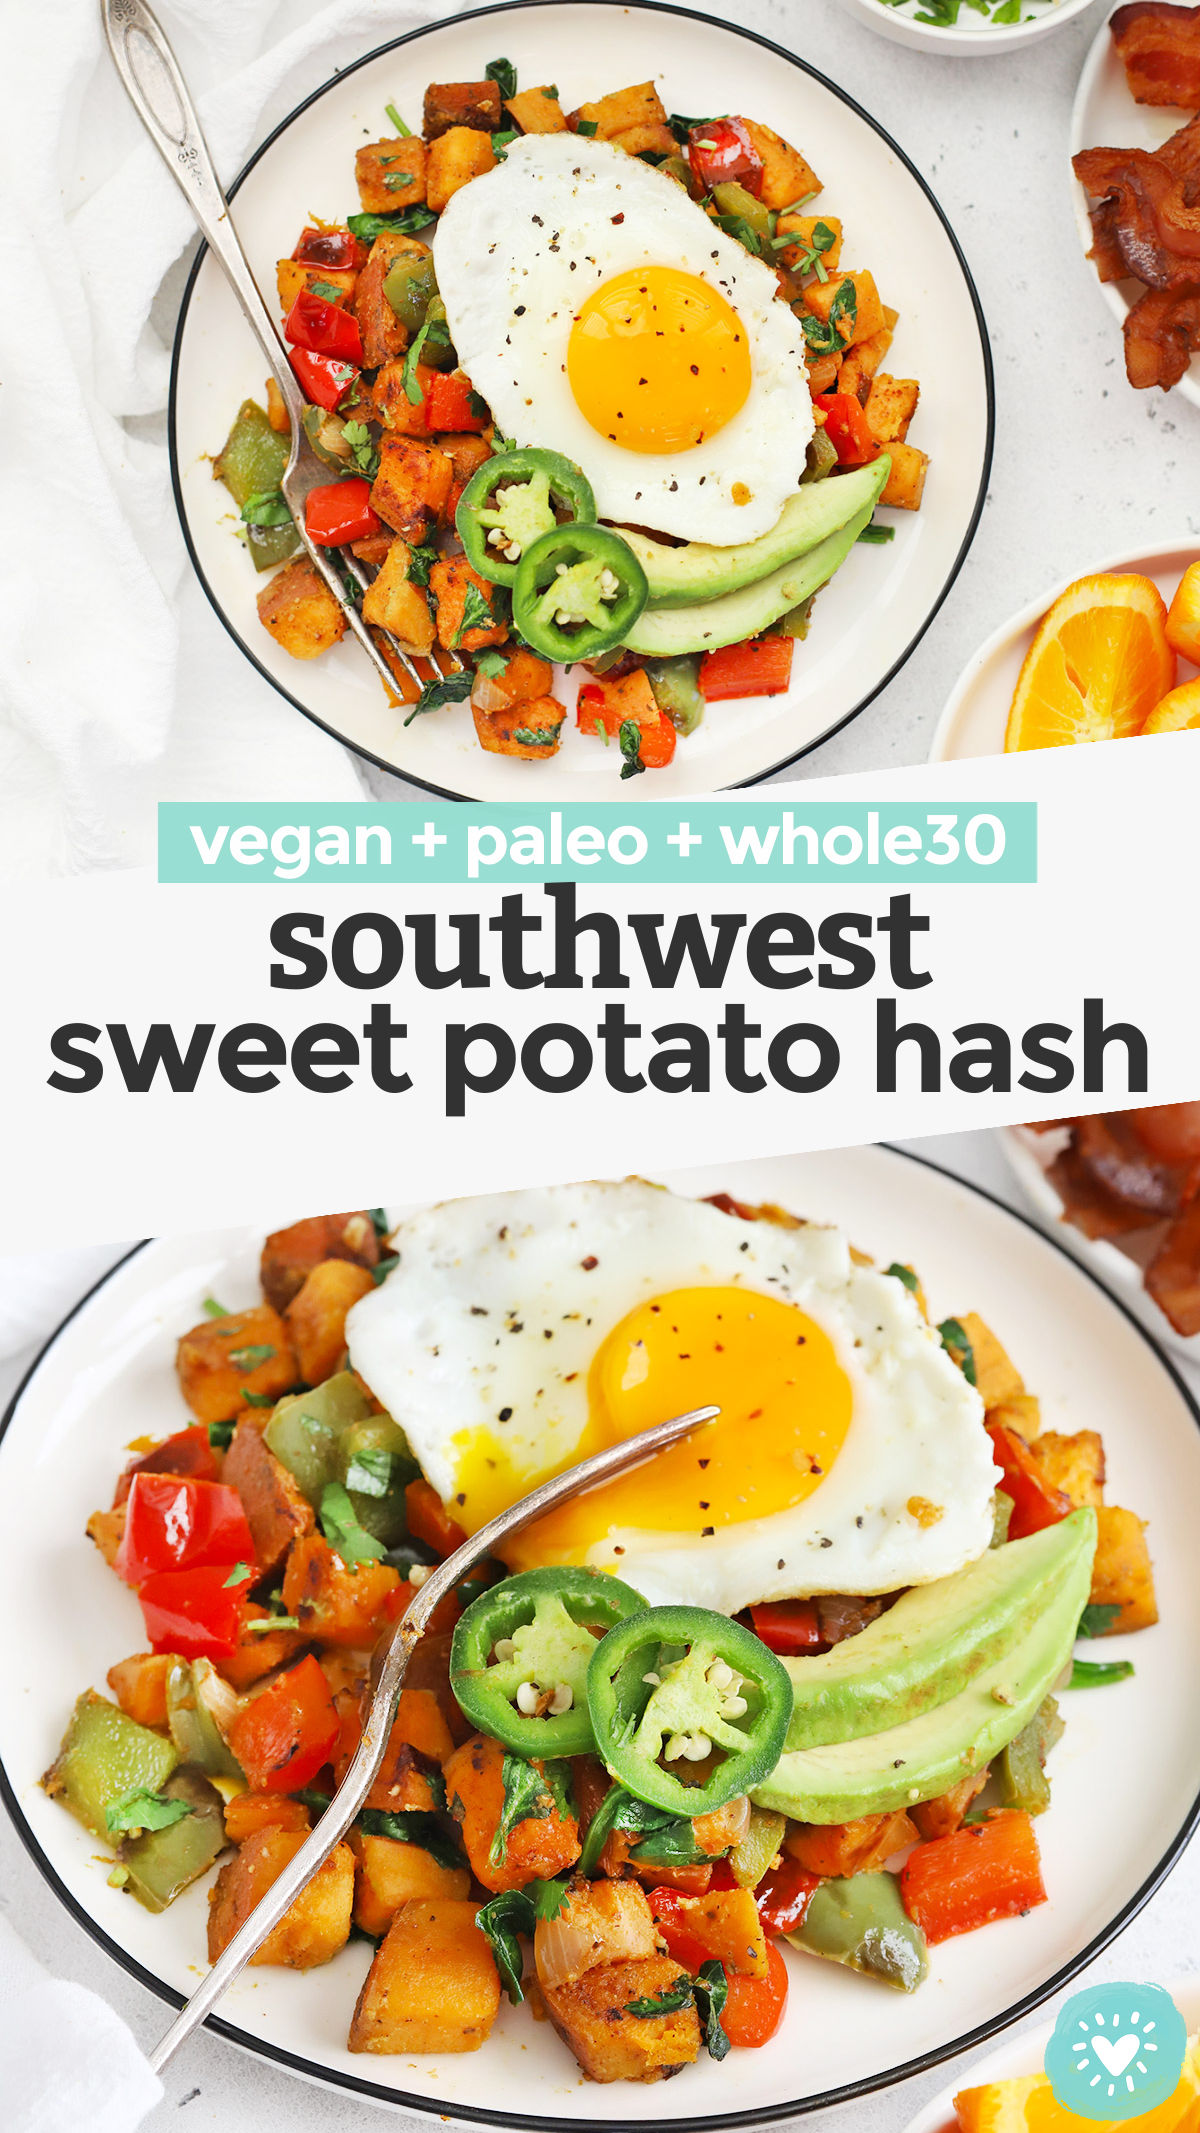 Sweet Potato Hash - This Southwest Sweet Potato Hash has a blend of warm spices, colorful veggies, and will keep you satisfied all morning long. A delicious, healthy breakfast any day of the week! (Vegan, Paleo, Whole30) // Paleo Sweet Potato Hash // Whole30 Sweet Potato Hash // Vegan Sweet Potato Hash // Whole30 breakfast // Paleo breakfast #healthybreakfast #paleo #vegan #glutenfree #vegetarian #whole30